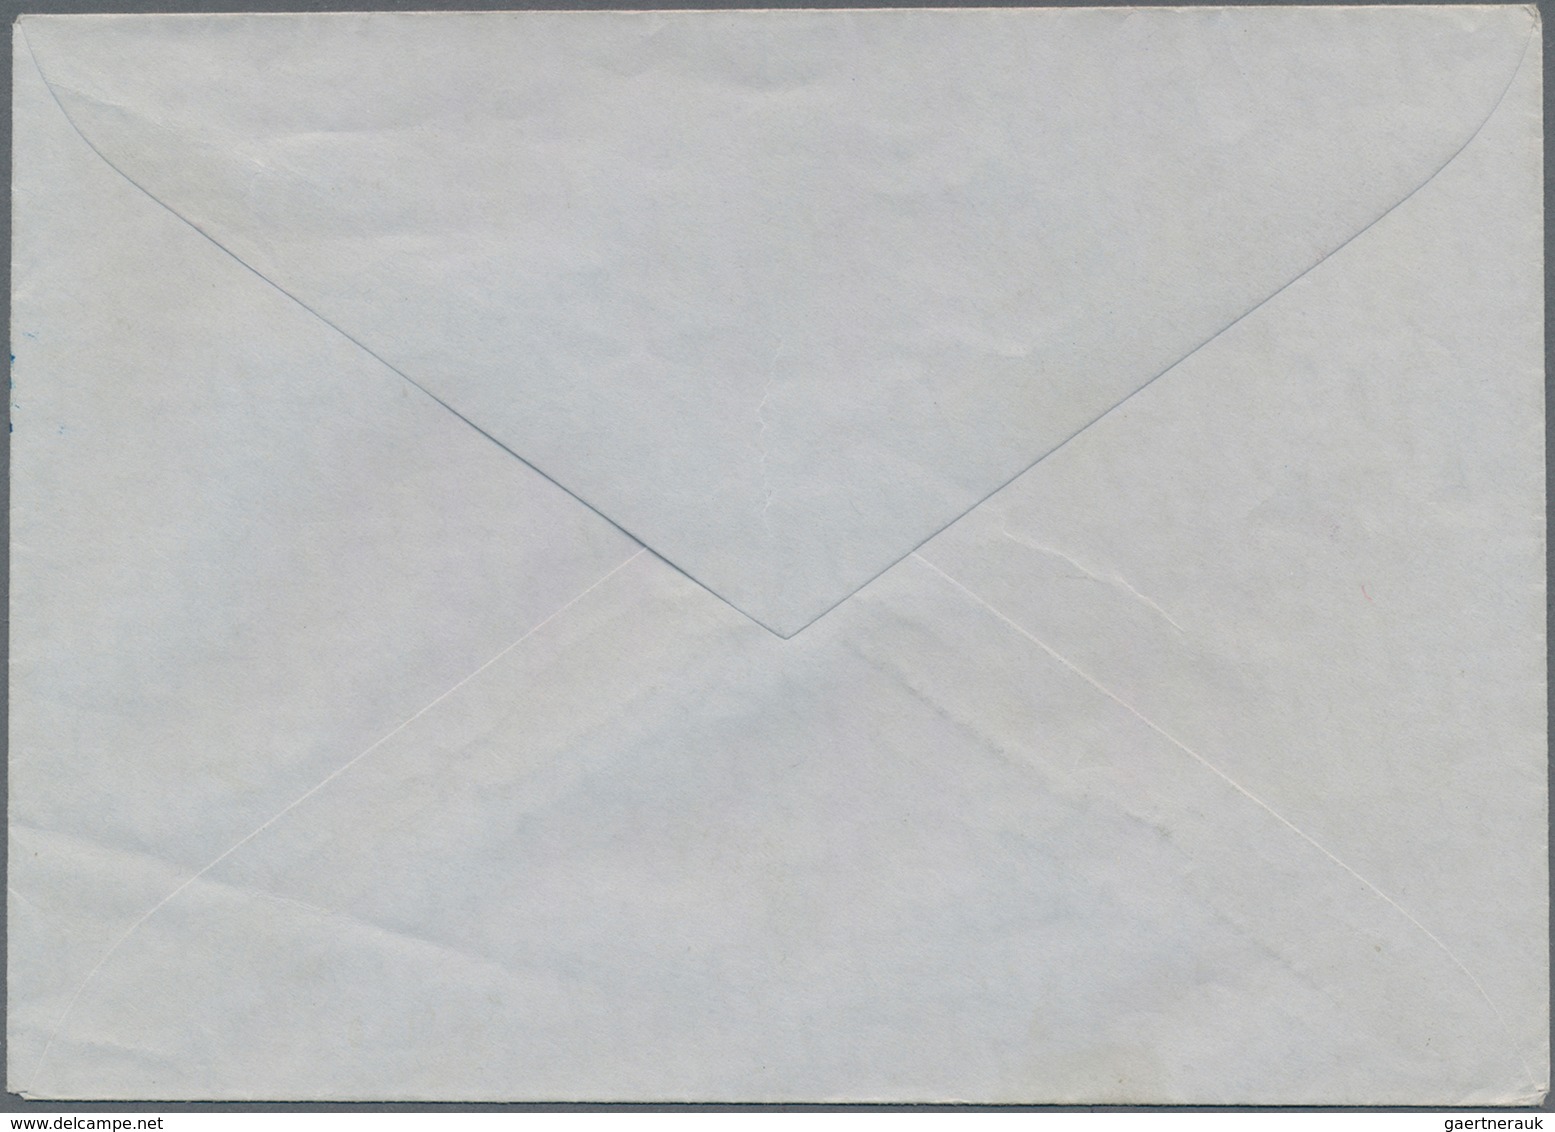 Sowjetunion - Ganzsachen: 1957, Picture Postal Stationery Envelope, Missed Yellow, Red And Green Col - Ohne Zuordnung